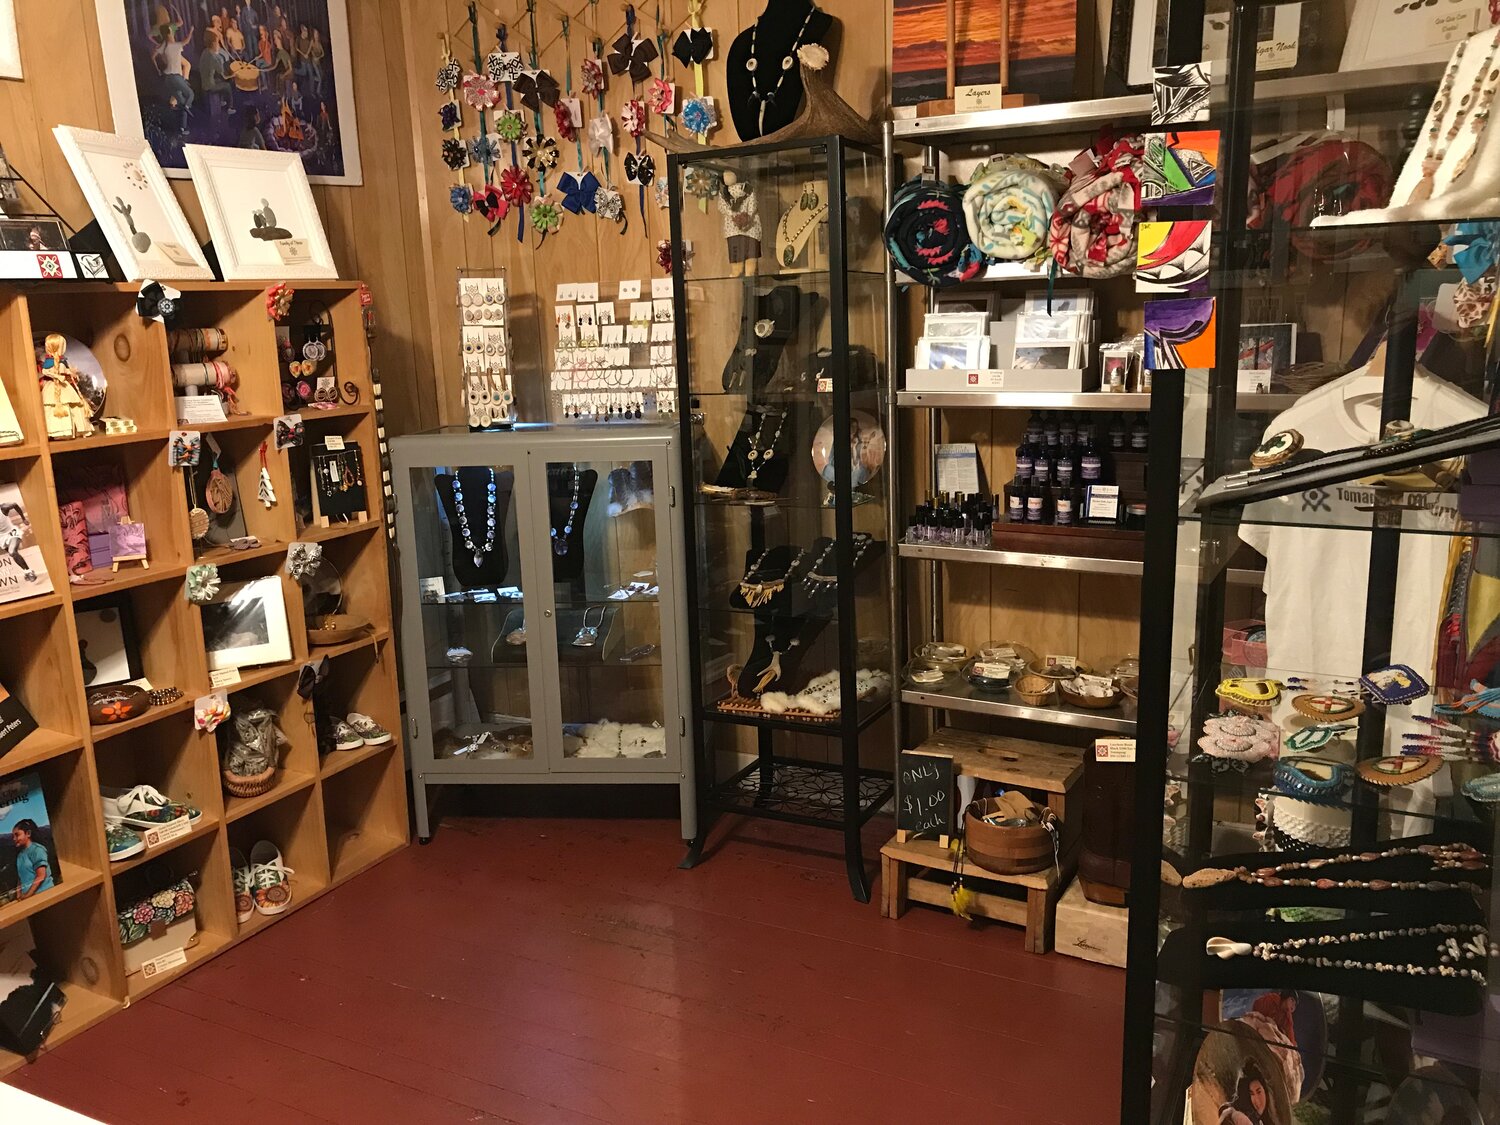 Shop authentic Indigenous art at the Tomaquag Museum's gift shop